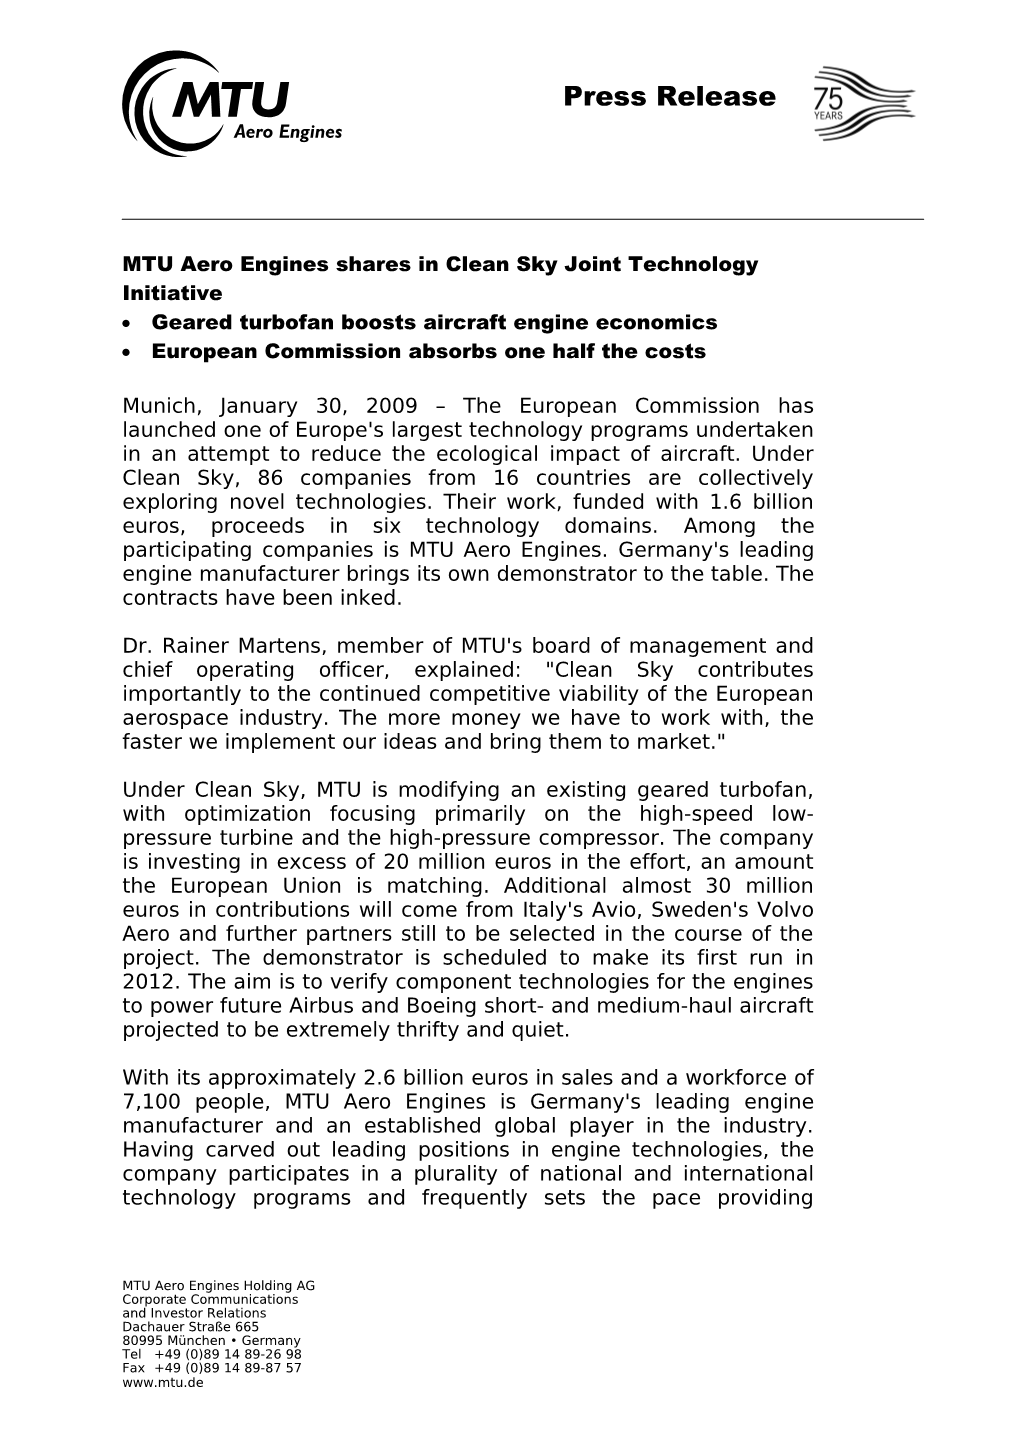 MTU Aero Engines Shares in Clean Sky Joint Technology Initiative